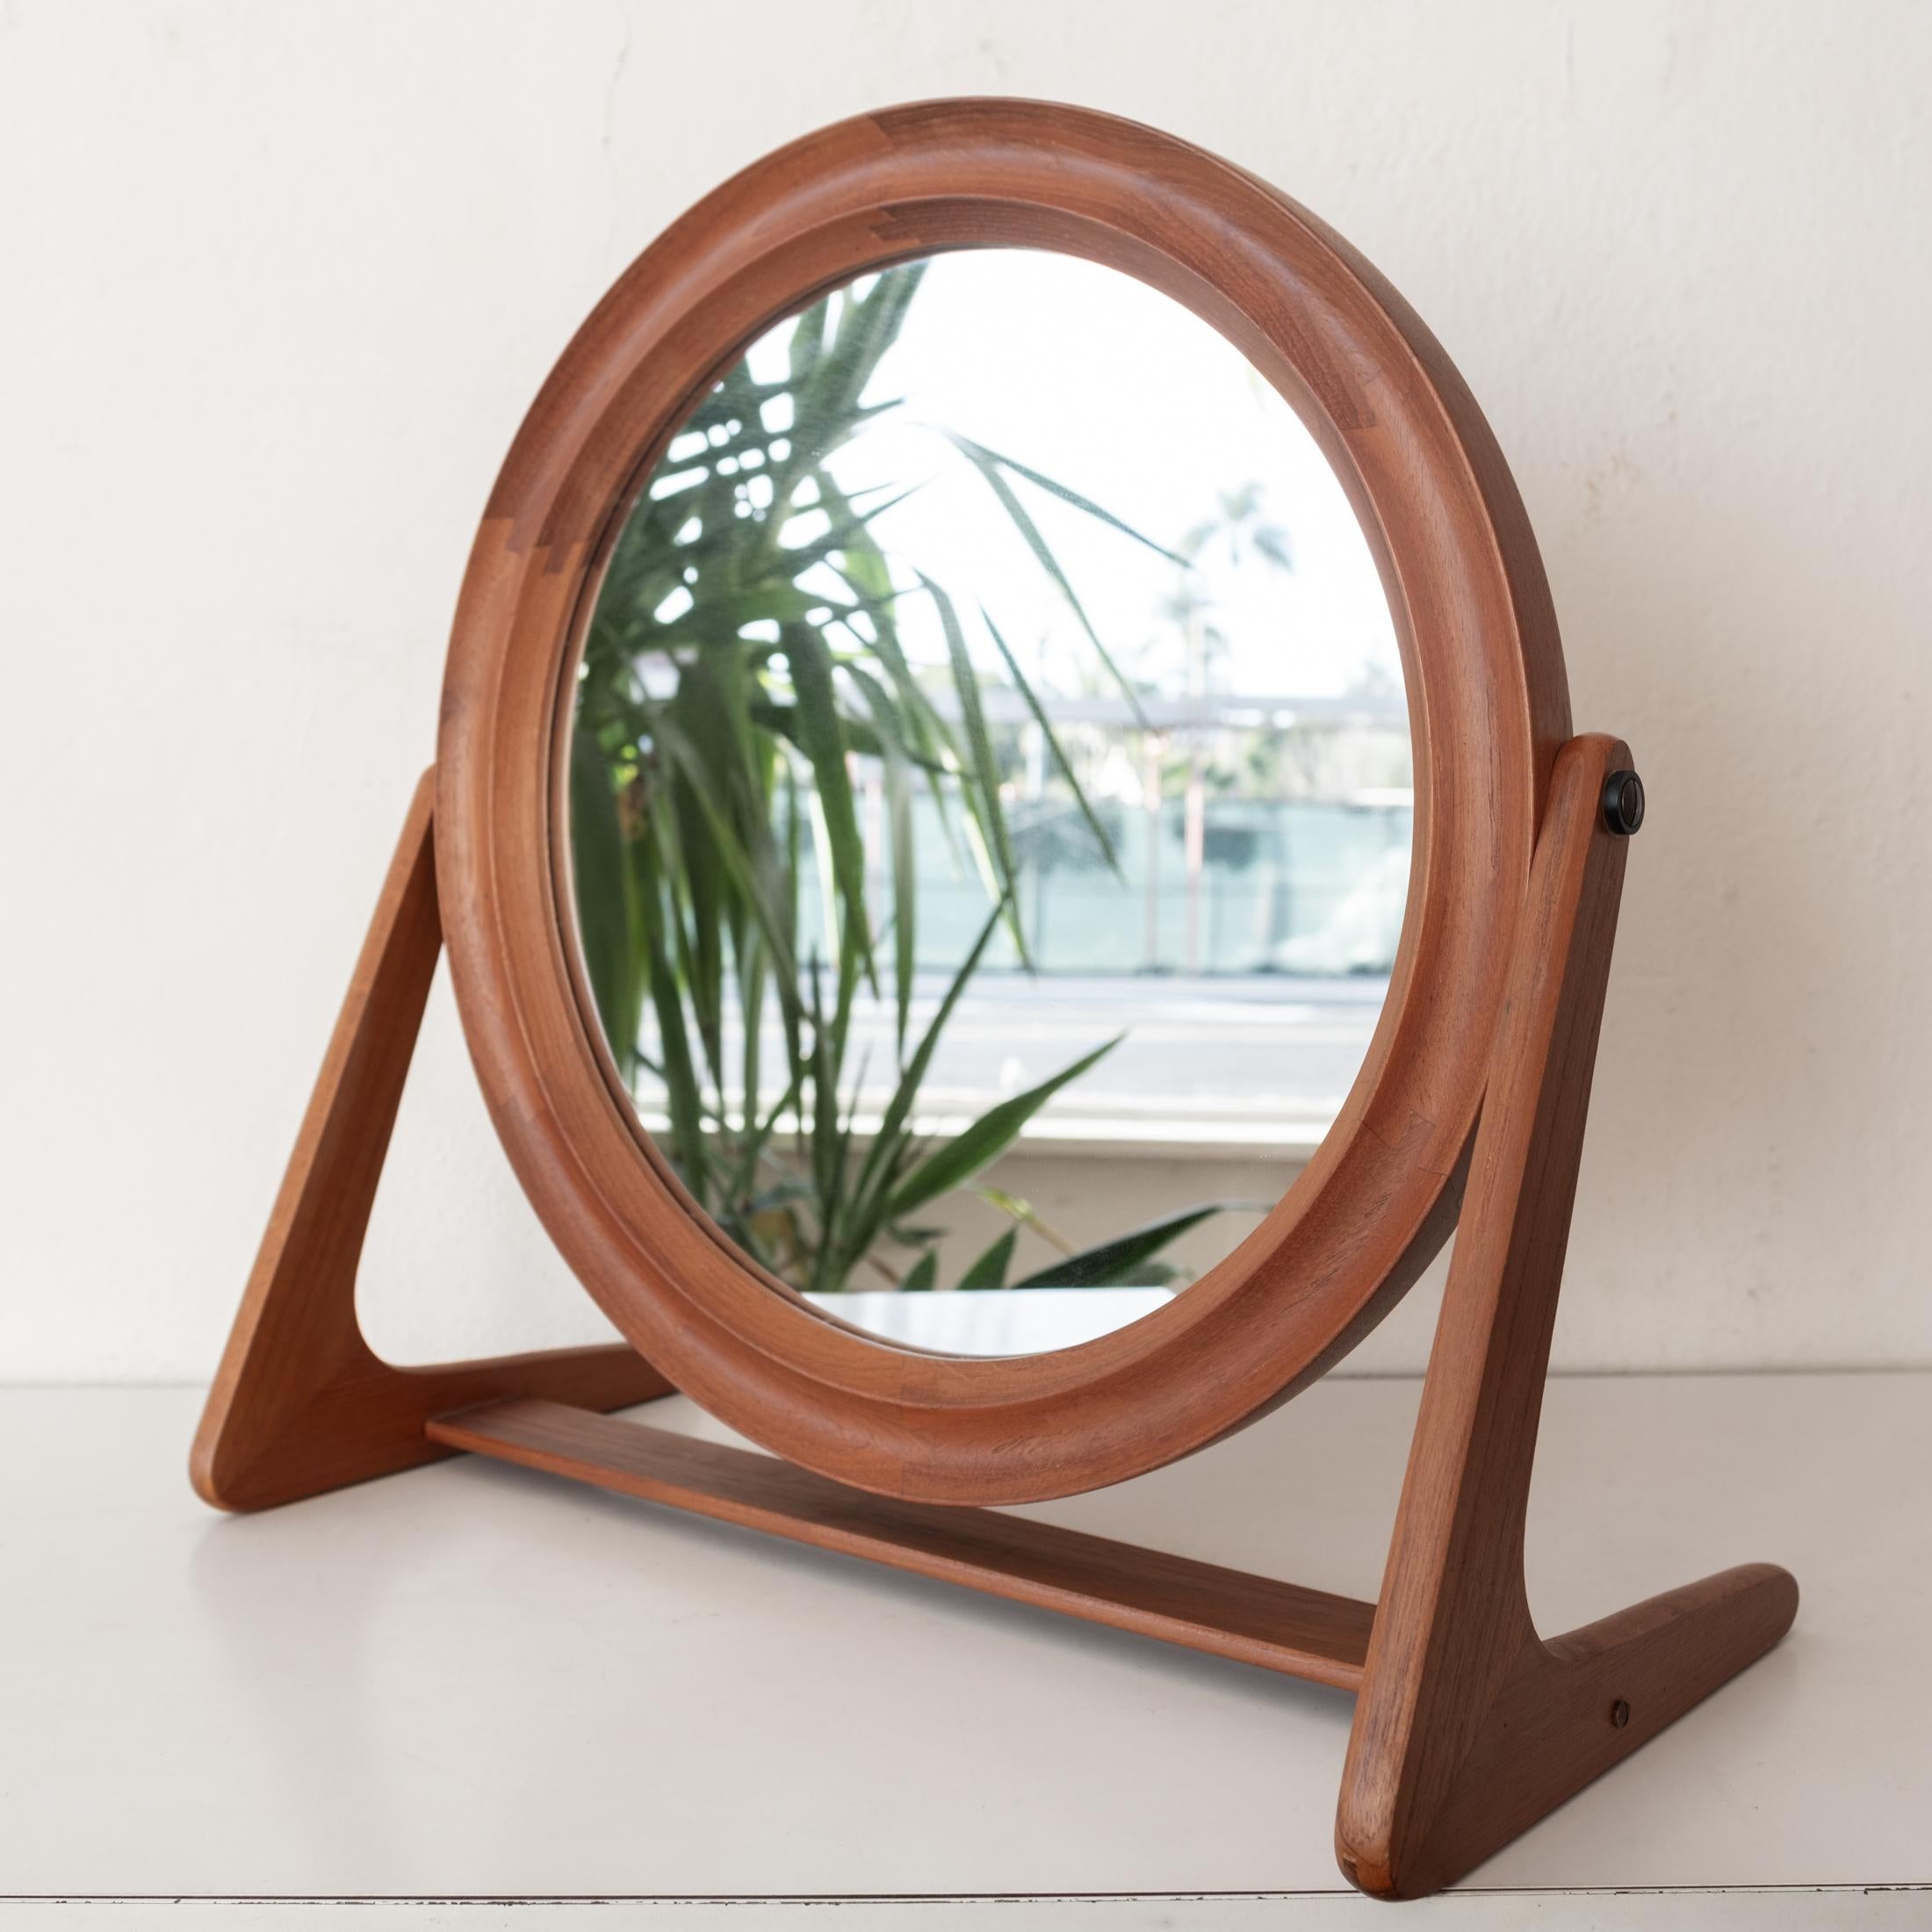 Pedersen and Hansen Danish Modern vanity or table top mirror. Adjustable. Solid teak construction with beautiful joinery. Retains the original label. Made in Denmark.